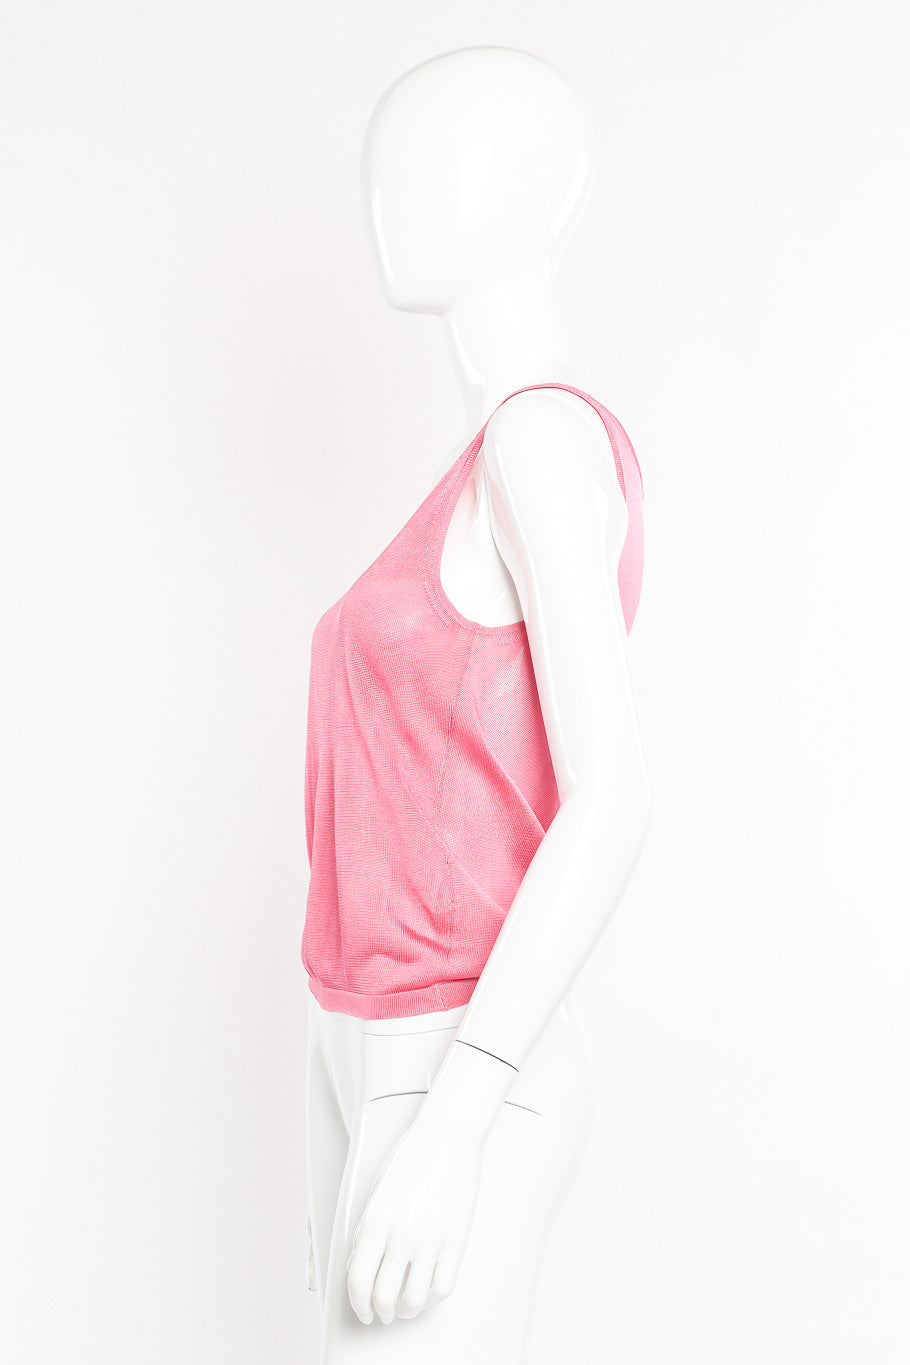 Cardigan and tank top set by Chanel on mannequin tank only side @recessla